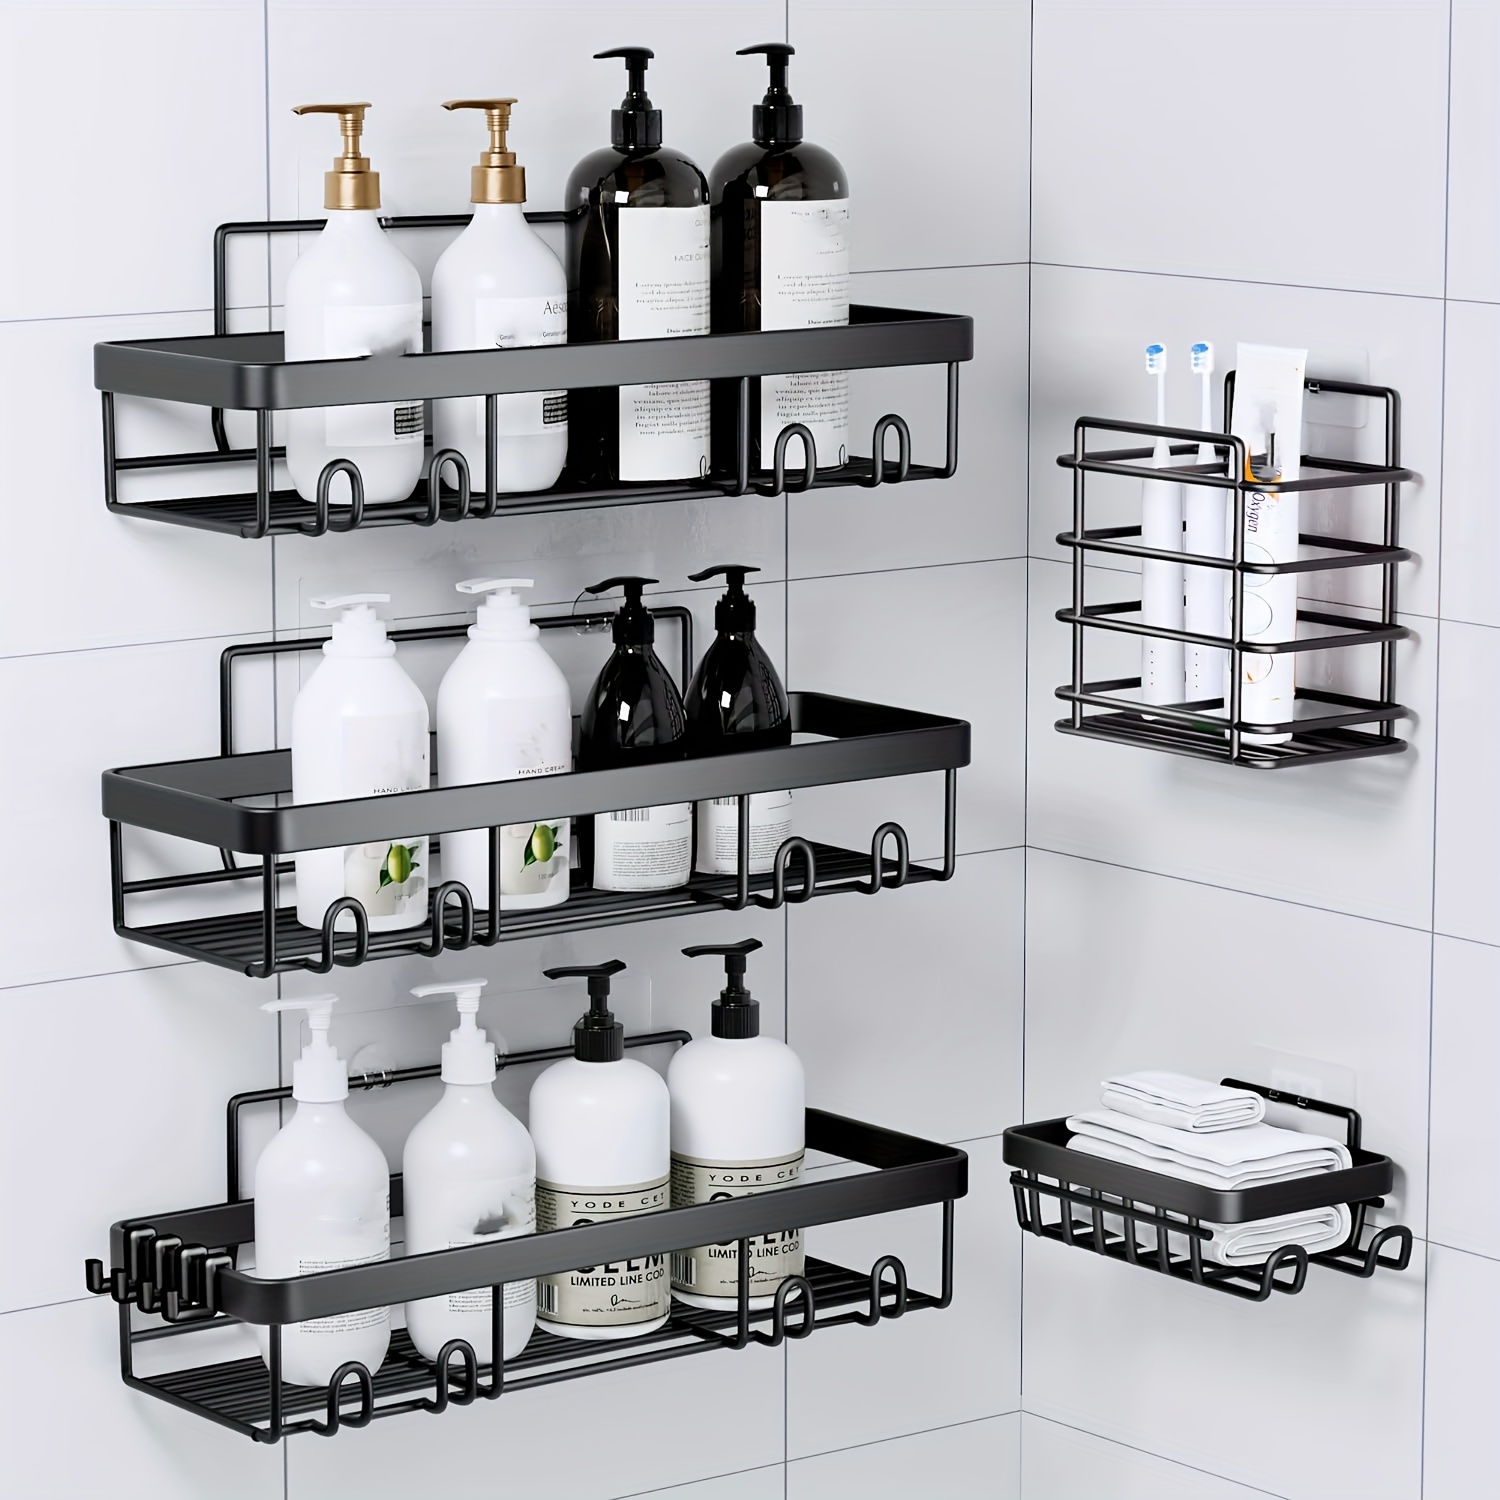 

Shower Caddy, Bathroom Shower Organizers, Black Shower Shelves For Inside Shower With Soap Caddy & Toothbrush Holder, Stainless Steel Wall Rack Baskets Adhesives Mounted (5 Pcs)